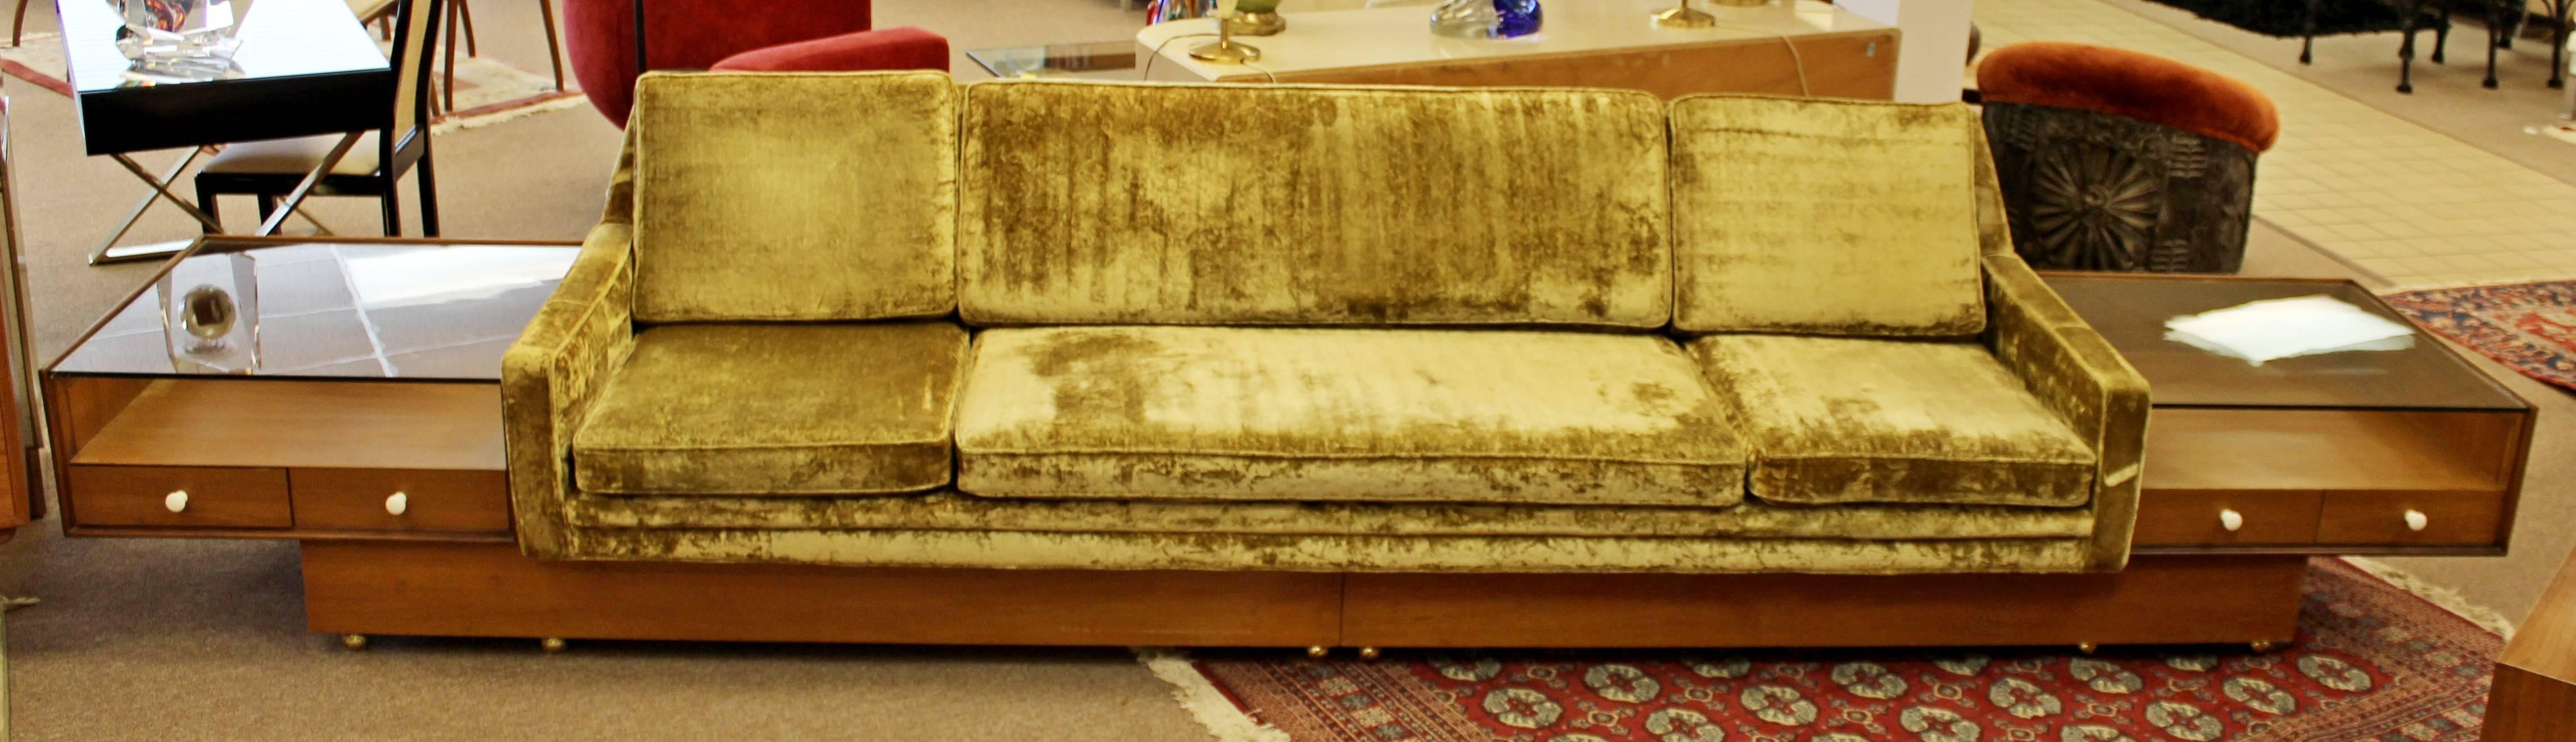 For your consideration is a rare and unique sofa on a walnut plinth base, with two attached side tables with glass tops, attributed to Adrian Pearsall. The whole piece is on brass caster wheels for easy mobility. Chartreuse crushed velvet